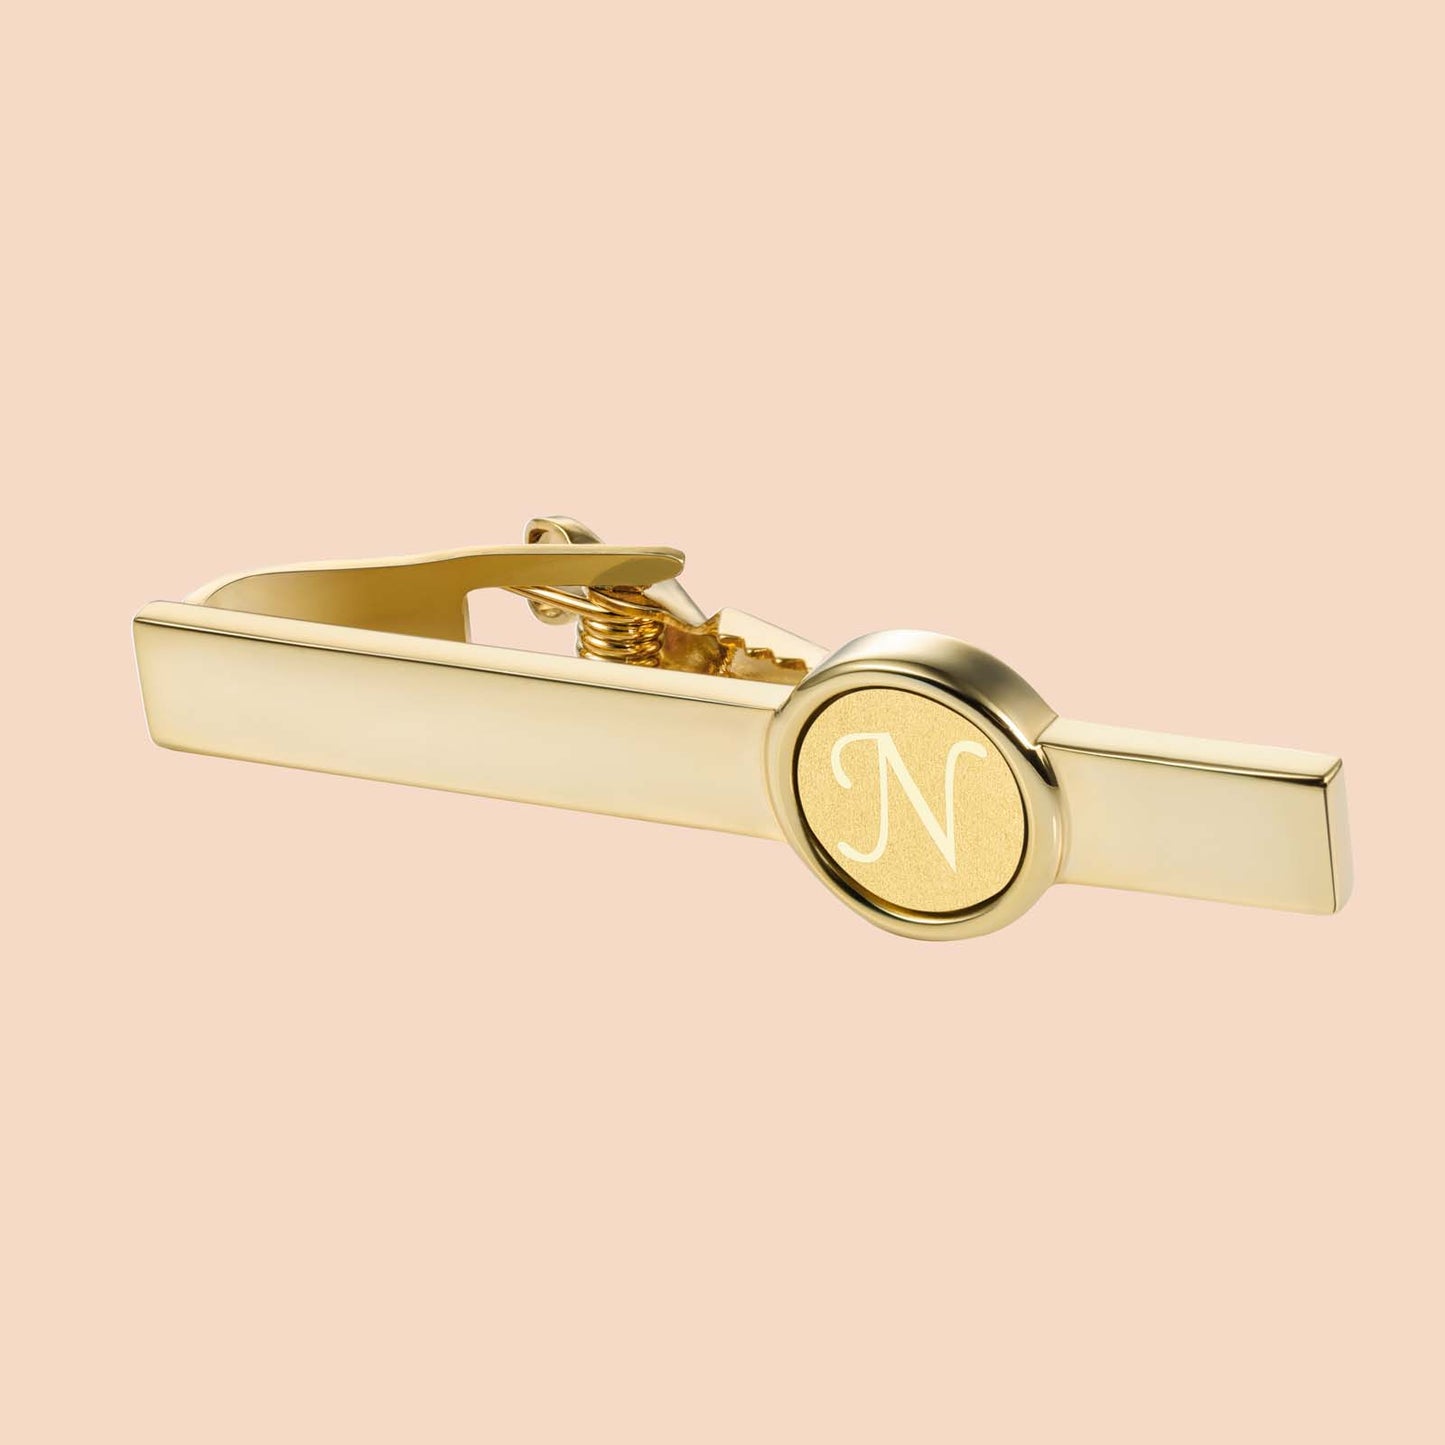 HAWOSN 2 Inch Gold Tone Initial Tie Clip for Men